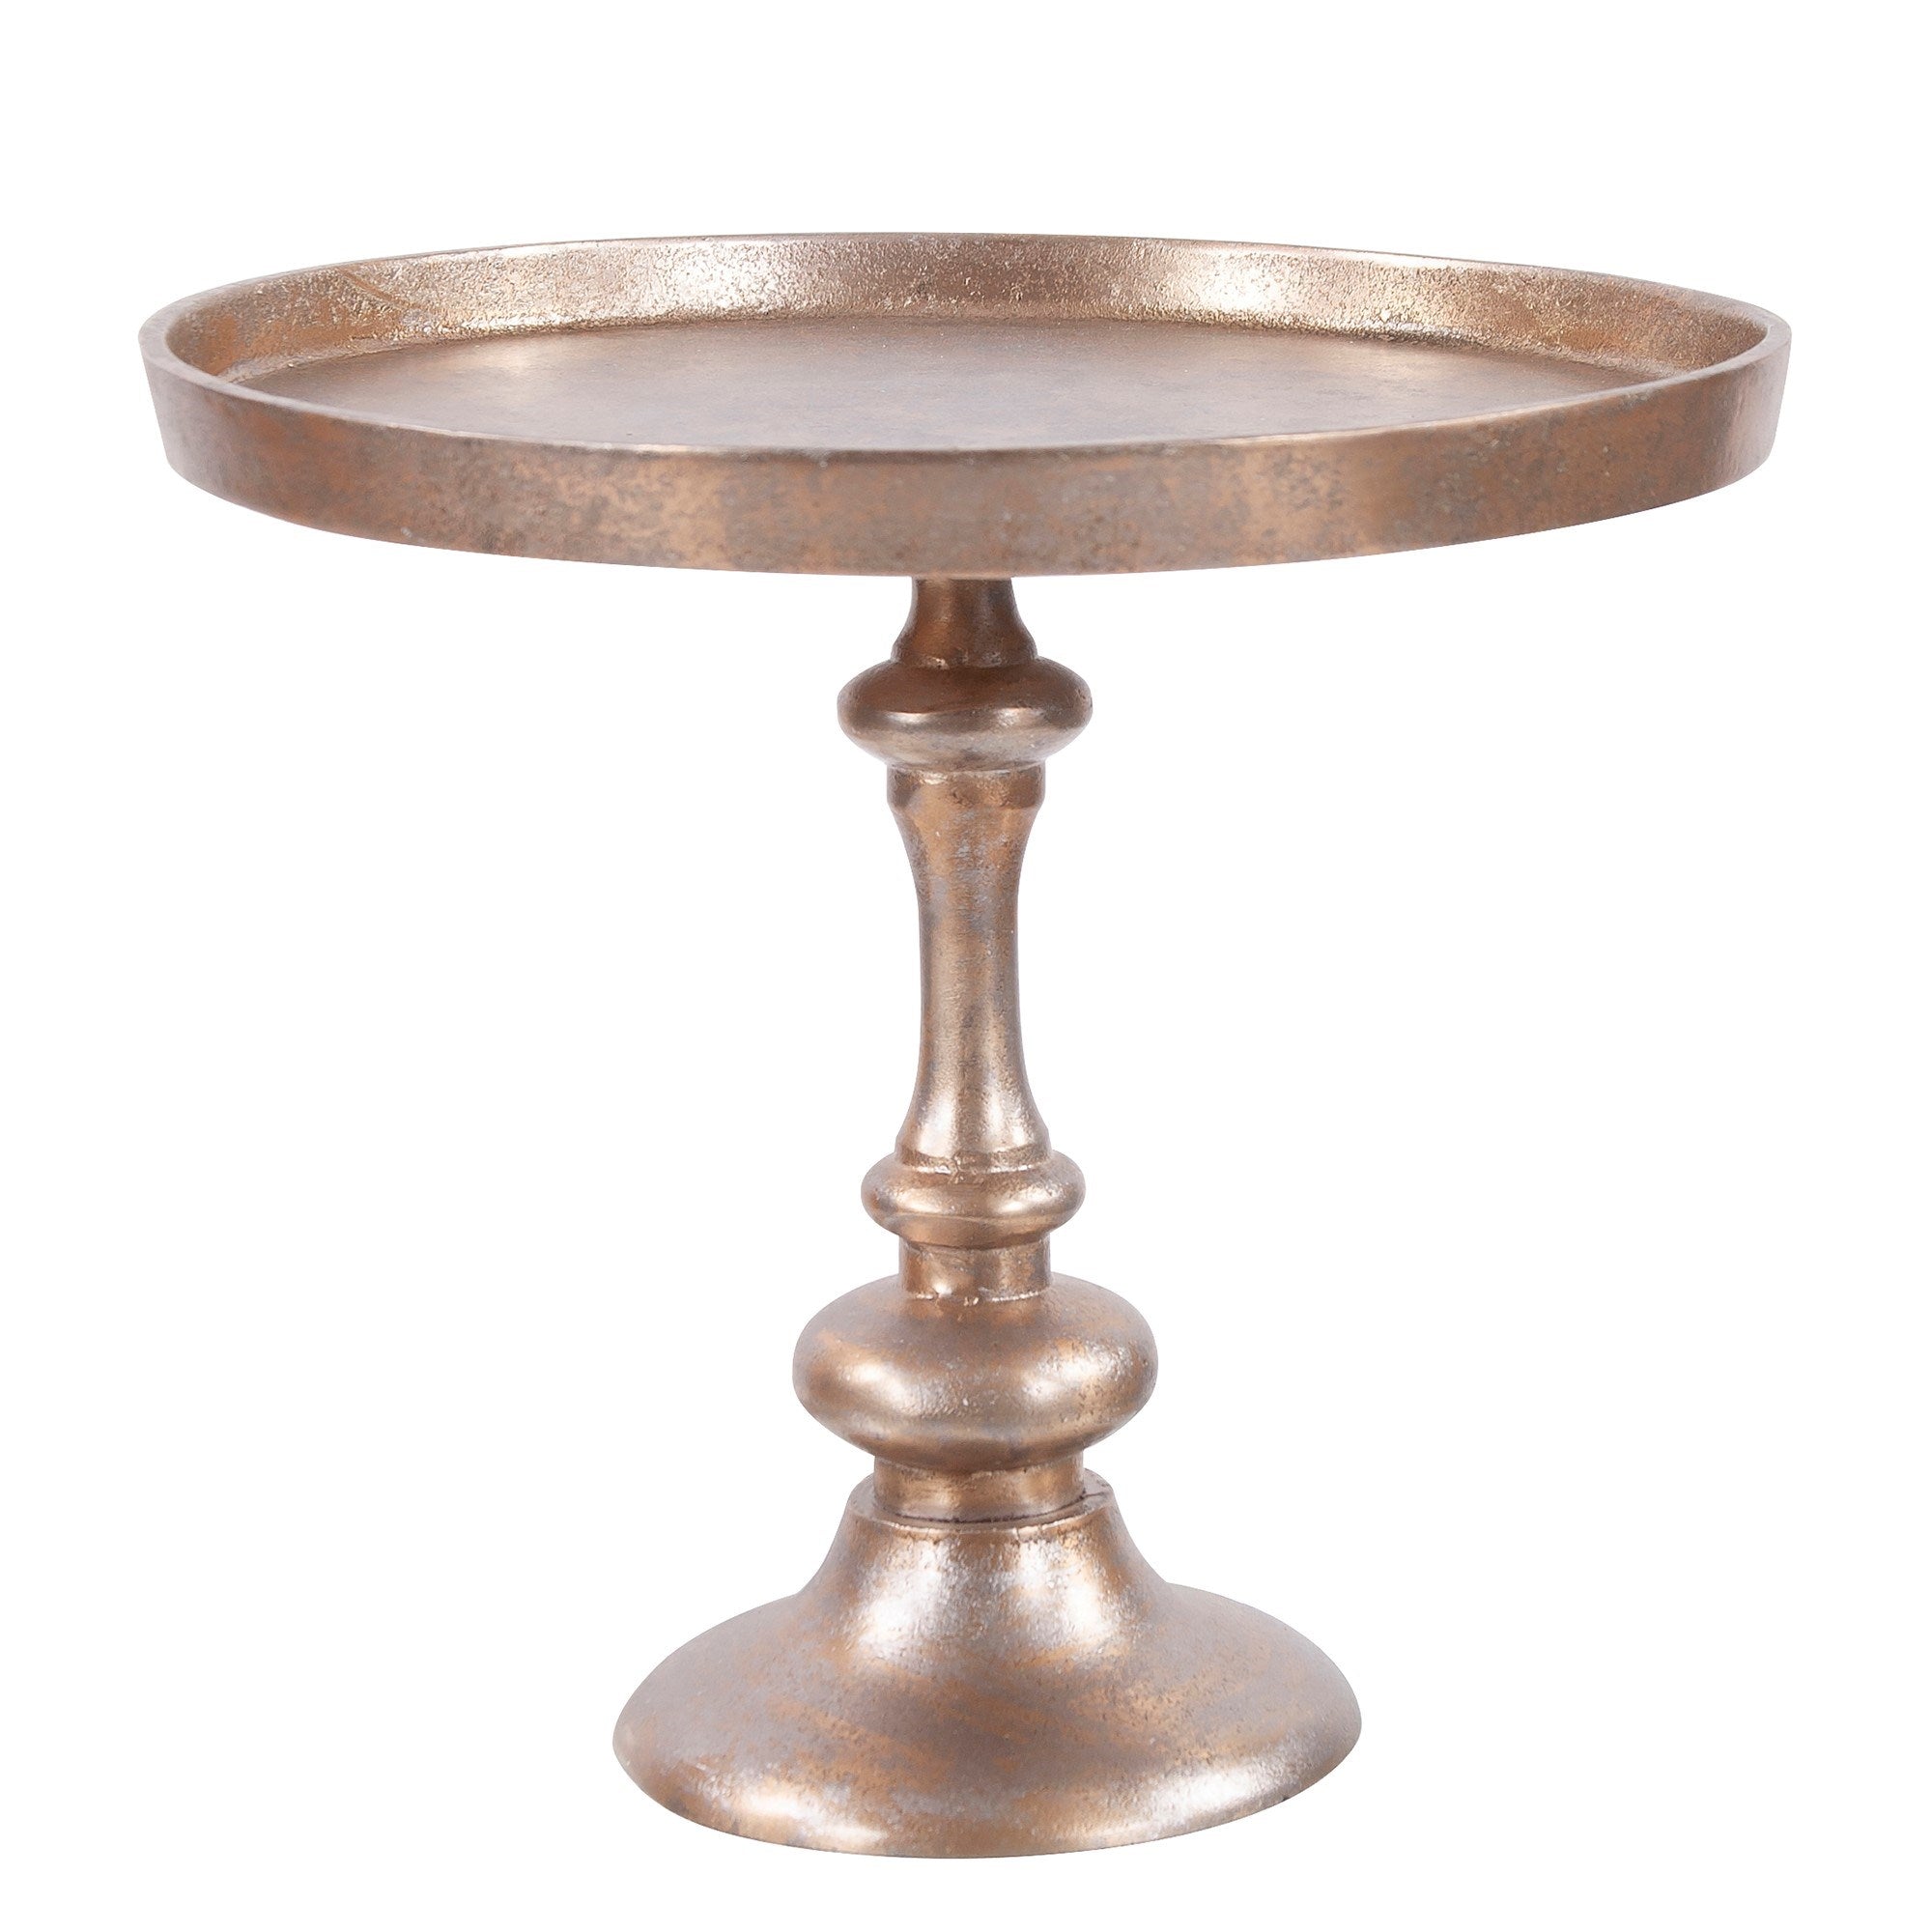 Aluminum Footed Tray in Antiqued Gold, Large